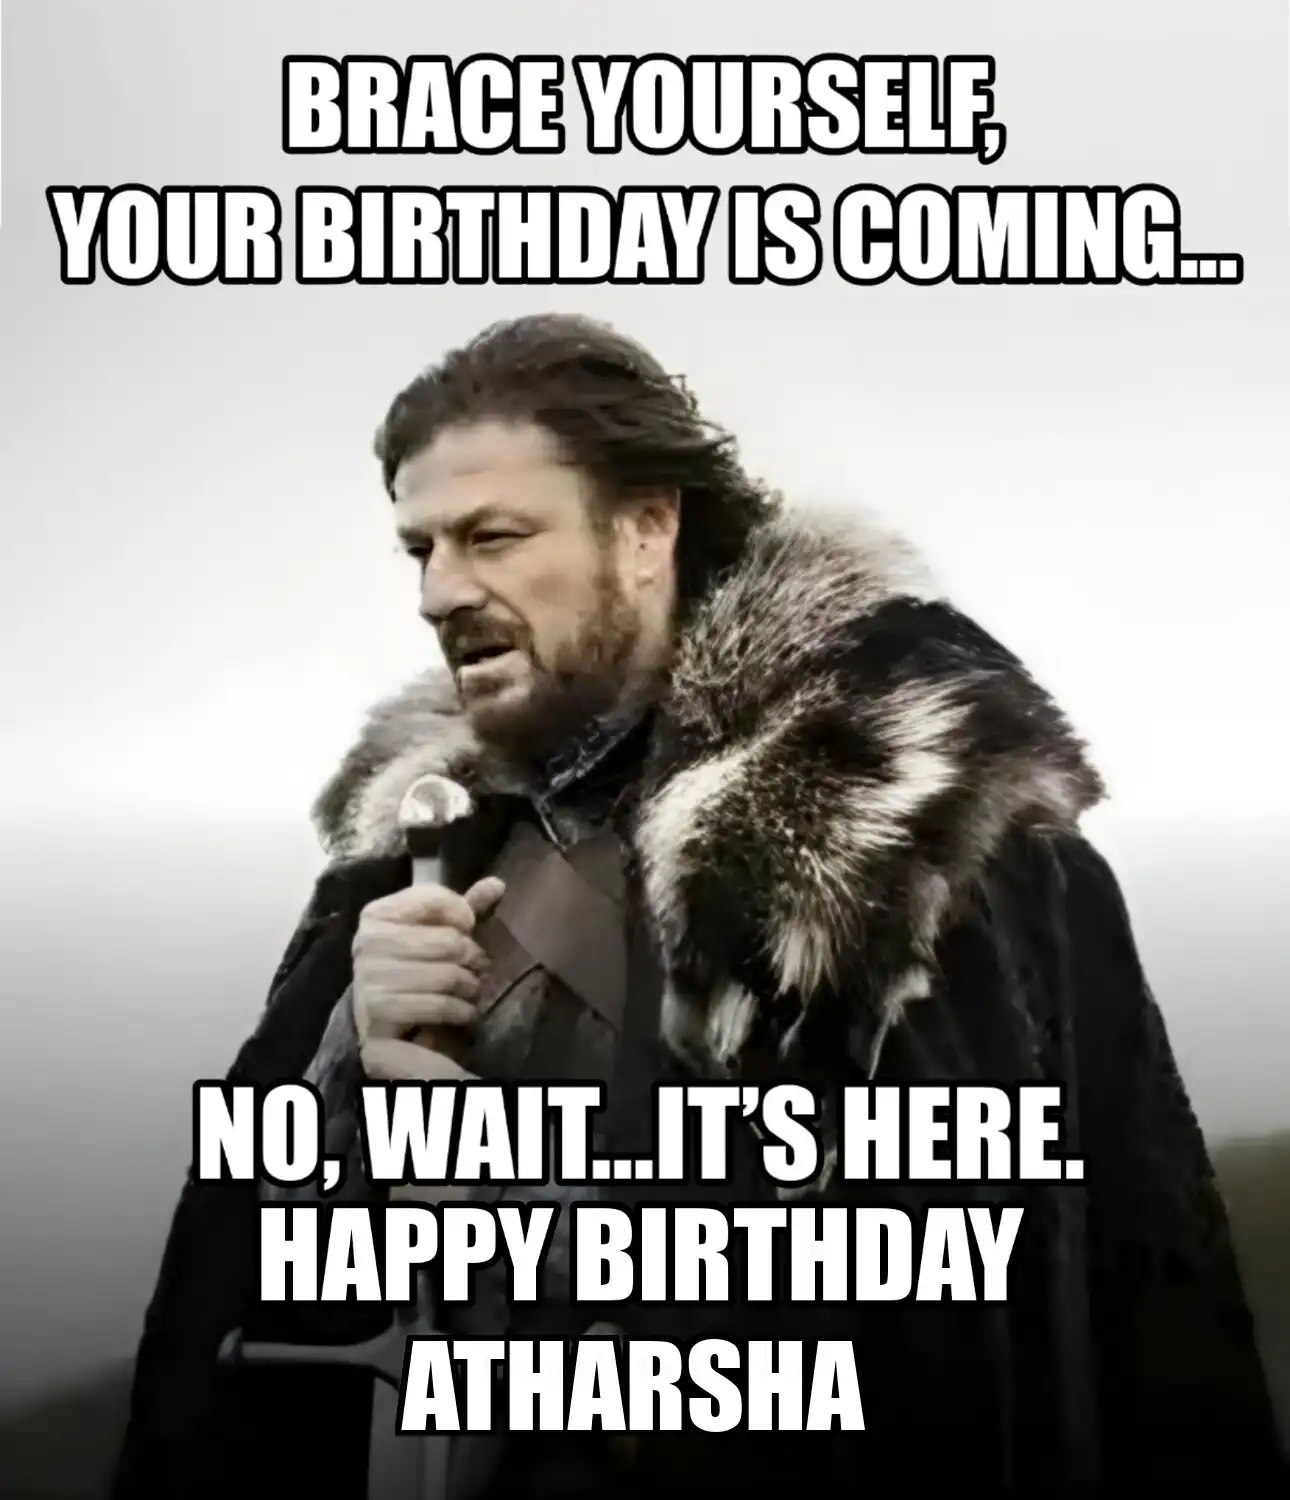 Happy Birthday Atharsha Brace Yourself Your Birthday Is Coming Meme